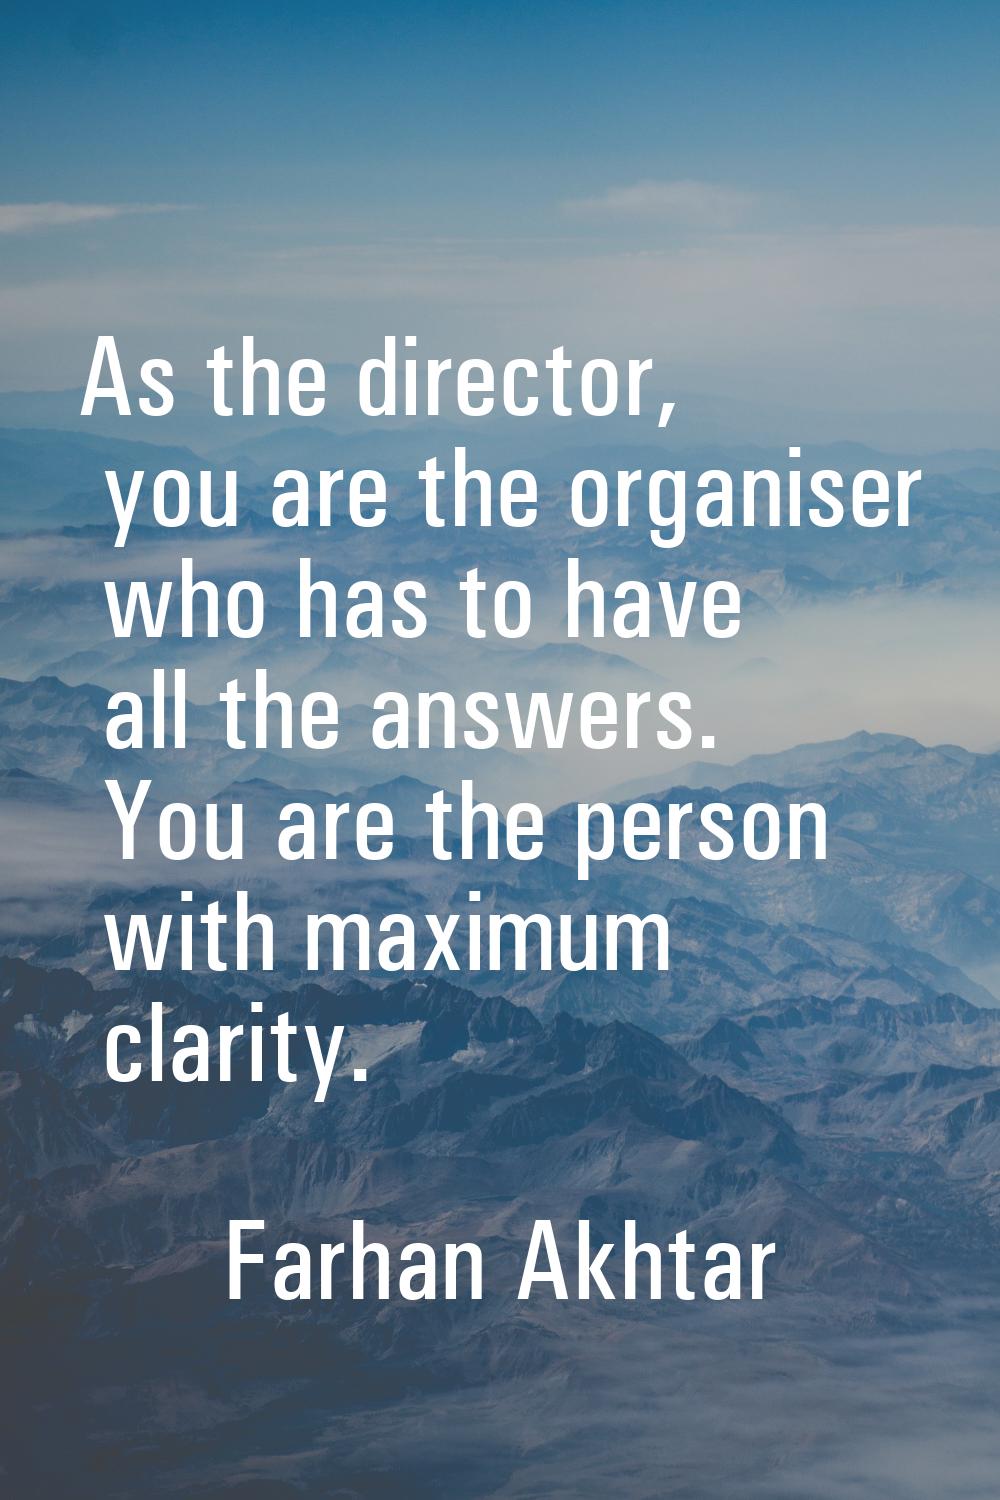 As the director, you are the organiser who has to have all the answers. You are the person with max